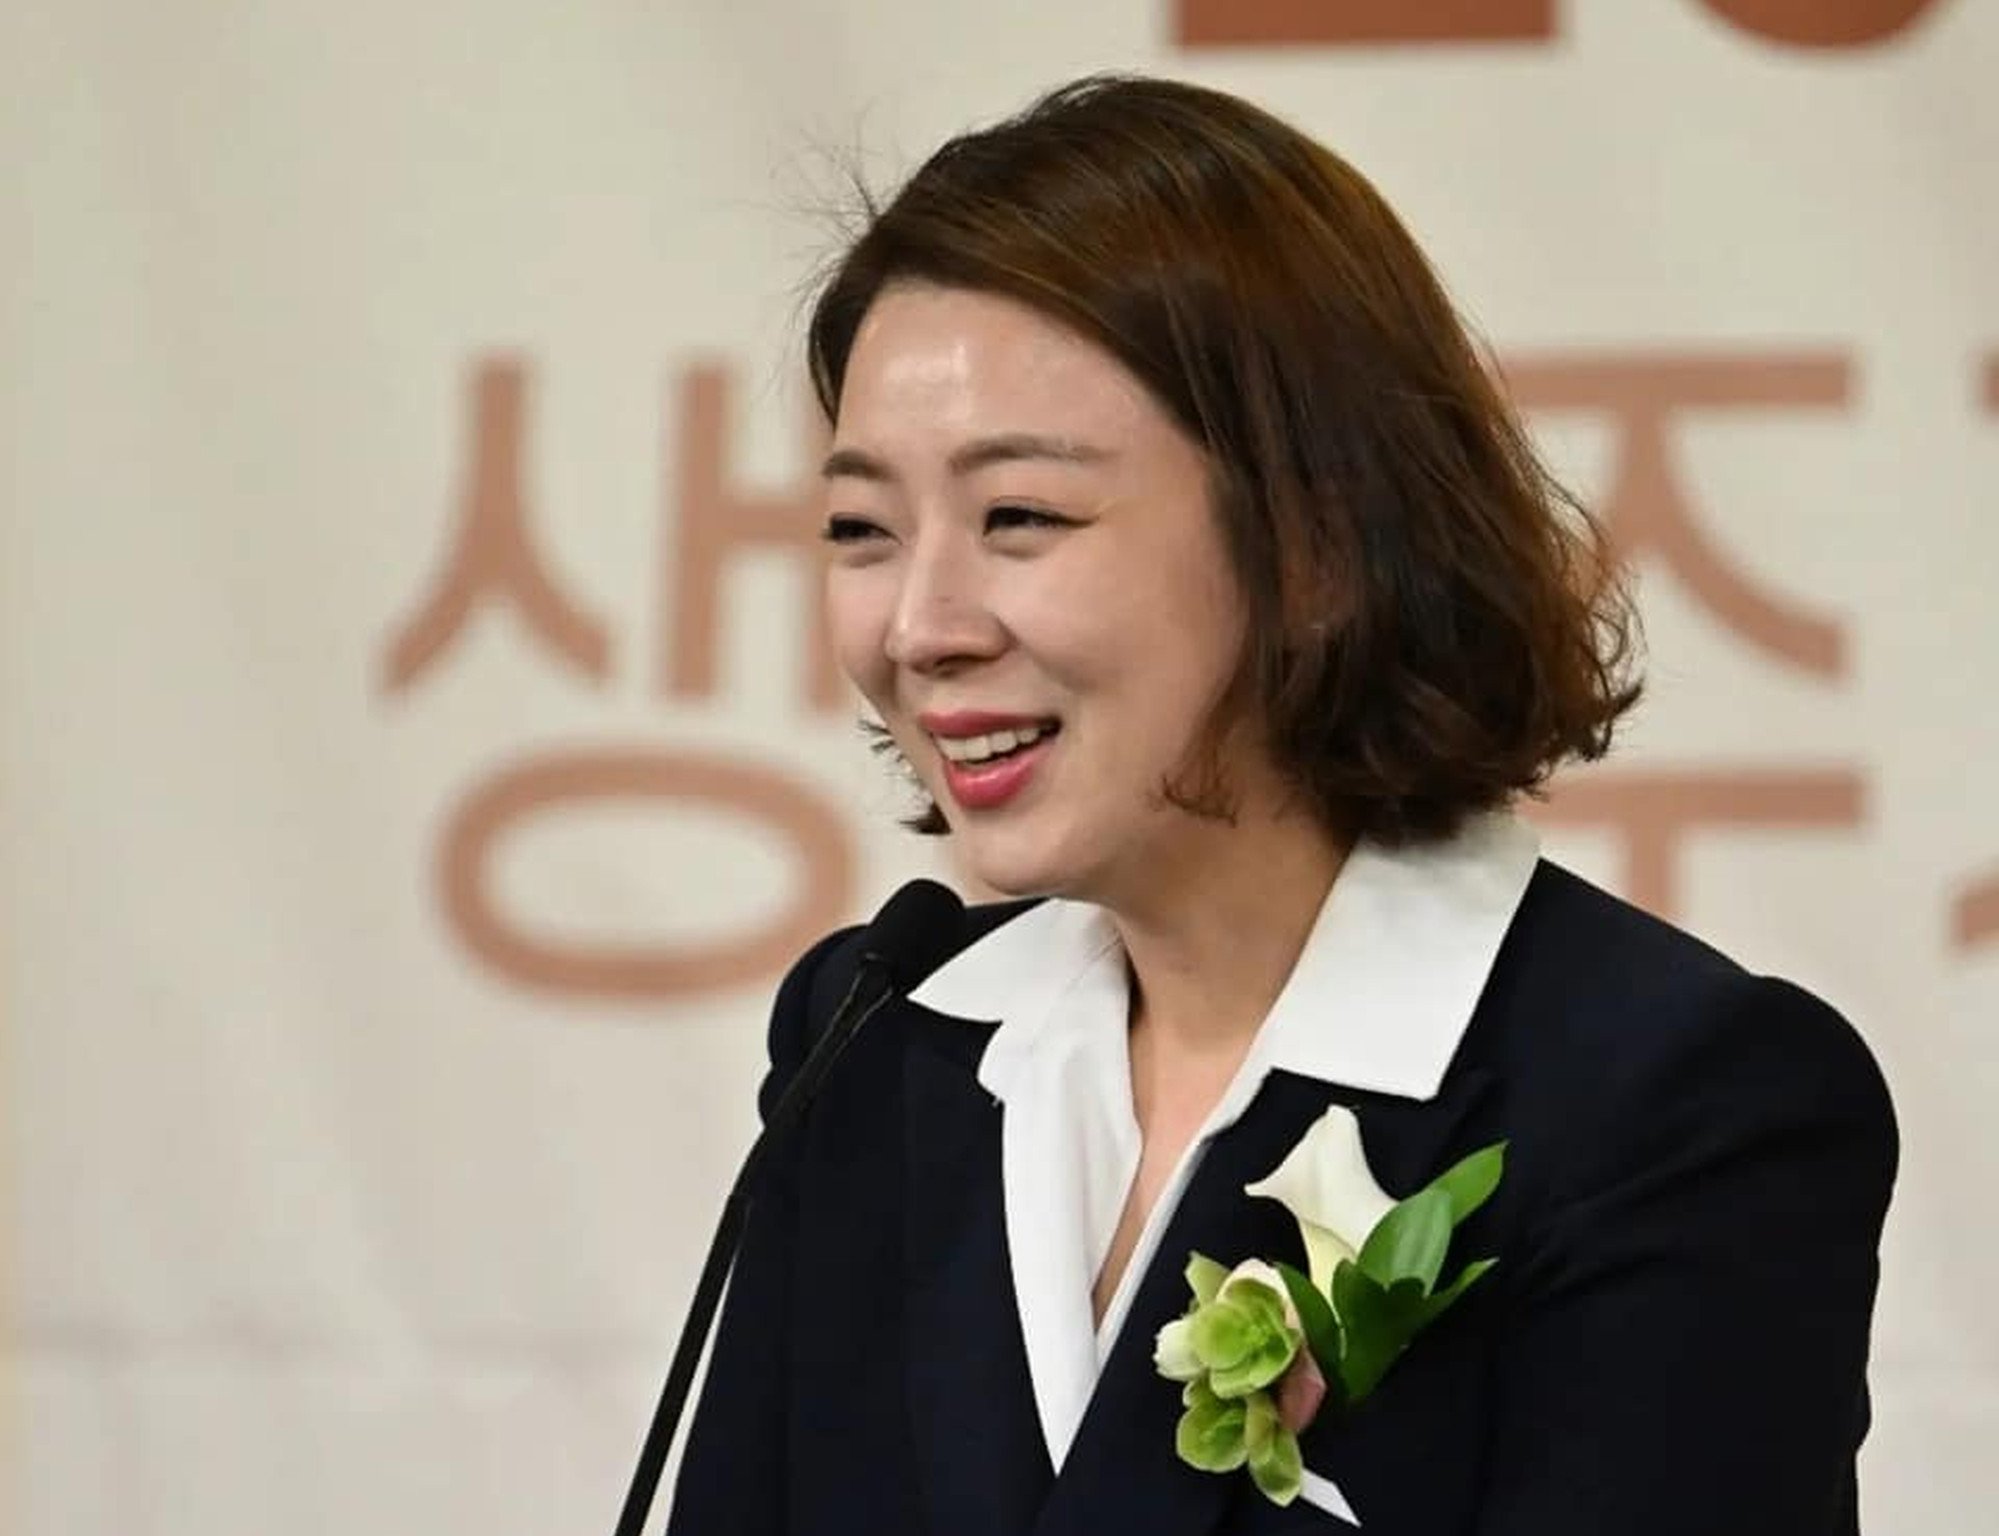 South Korean ruling party MP, Bae Hyun-jin, hospitalised after attack ...